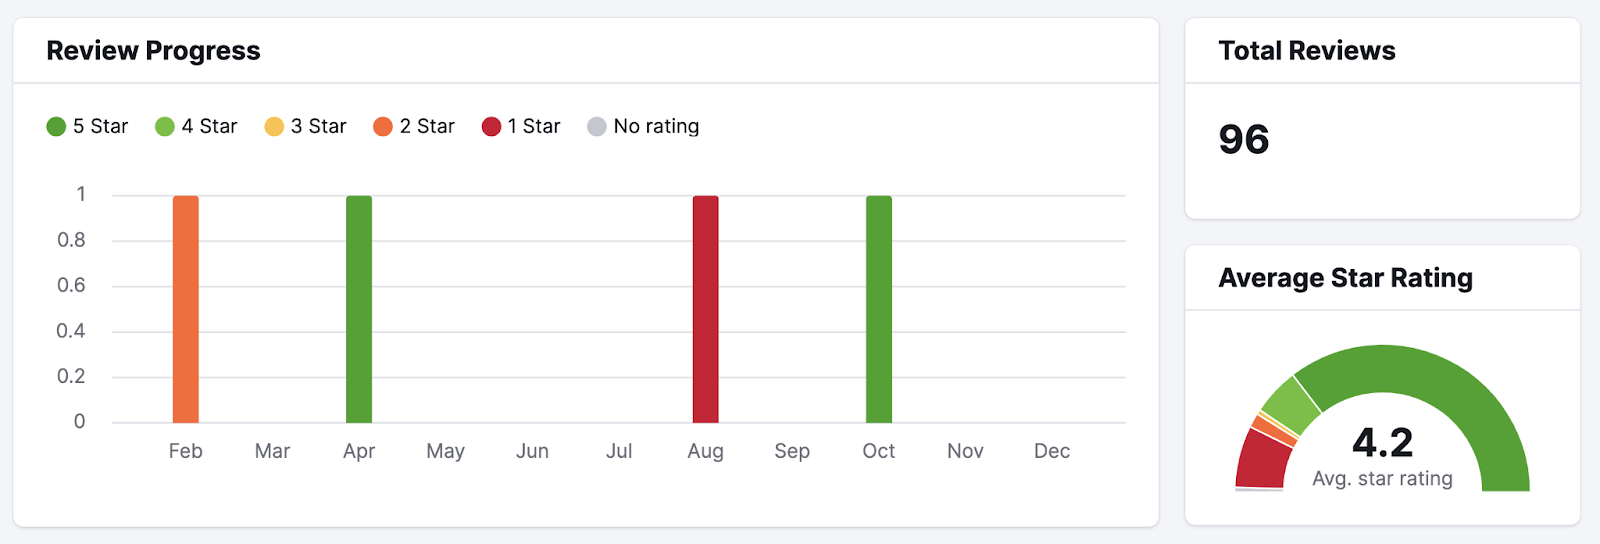 "Review Progress" graph in Review Management tool